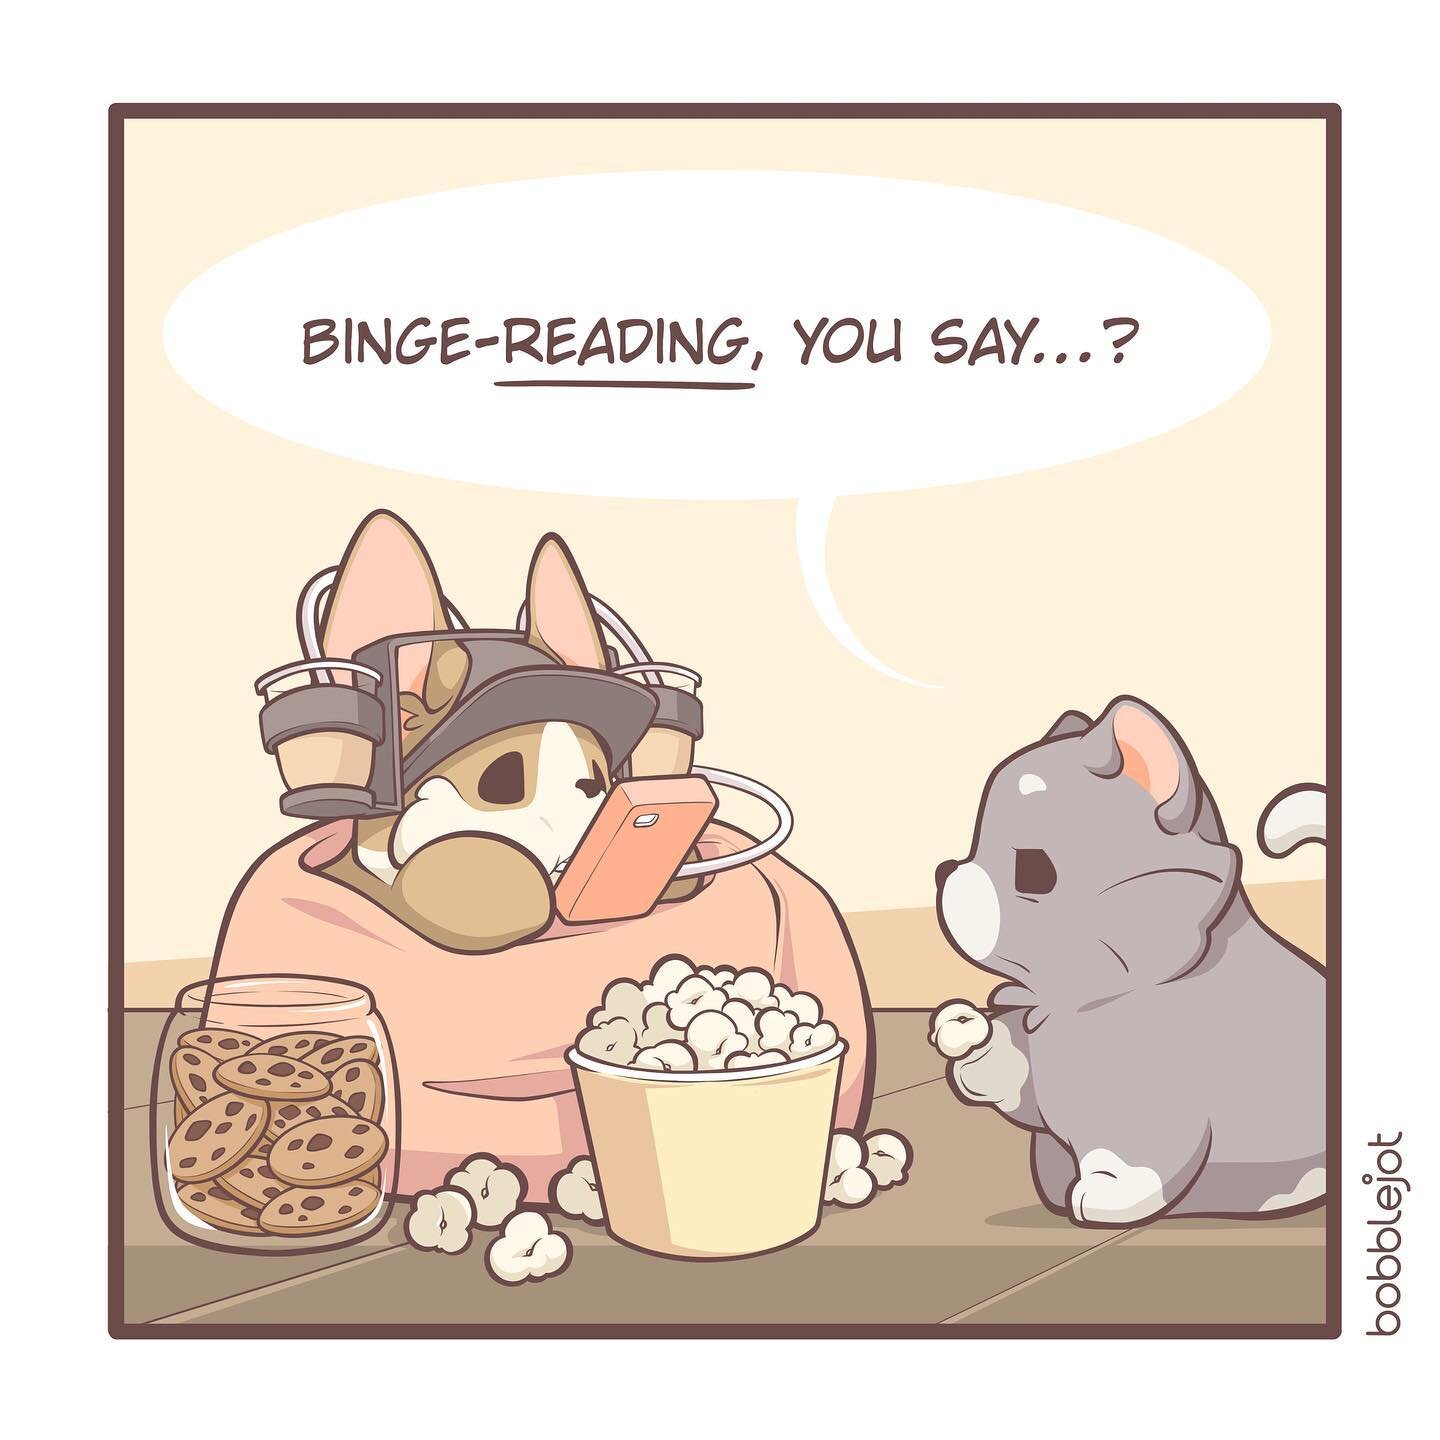 Tori&rsquo;s an expert at binging, whether it&rsquo;s reading or eating&hellip;
.
.
.
Hey guys! Our Tori and Samuel comics are officially on @mantacomics! If you ever feel like binging a series, you can check us out on their app, along with many othe